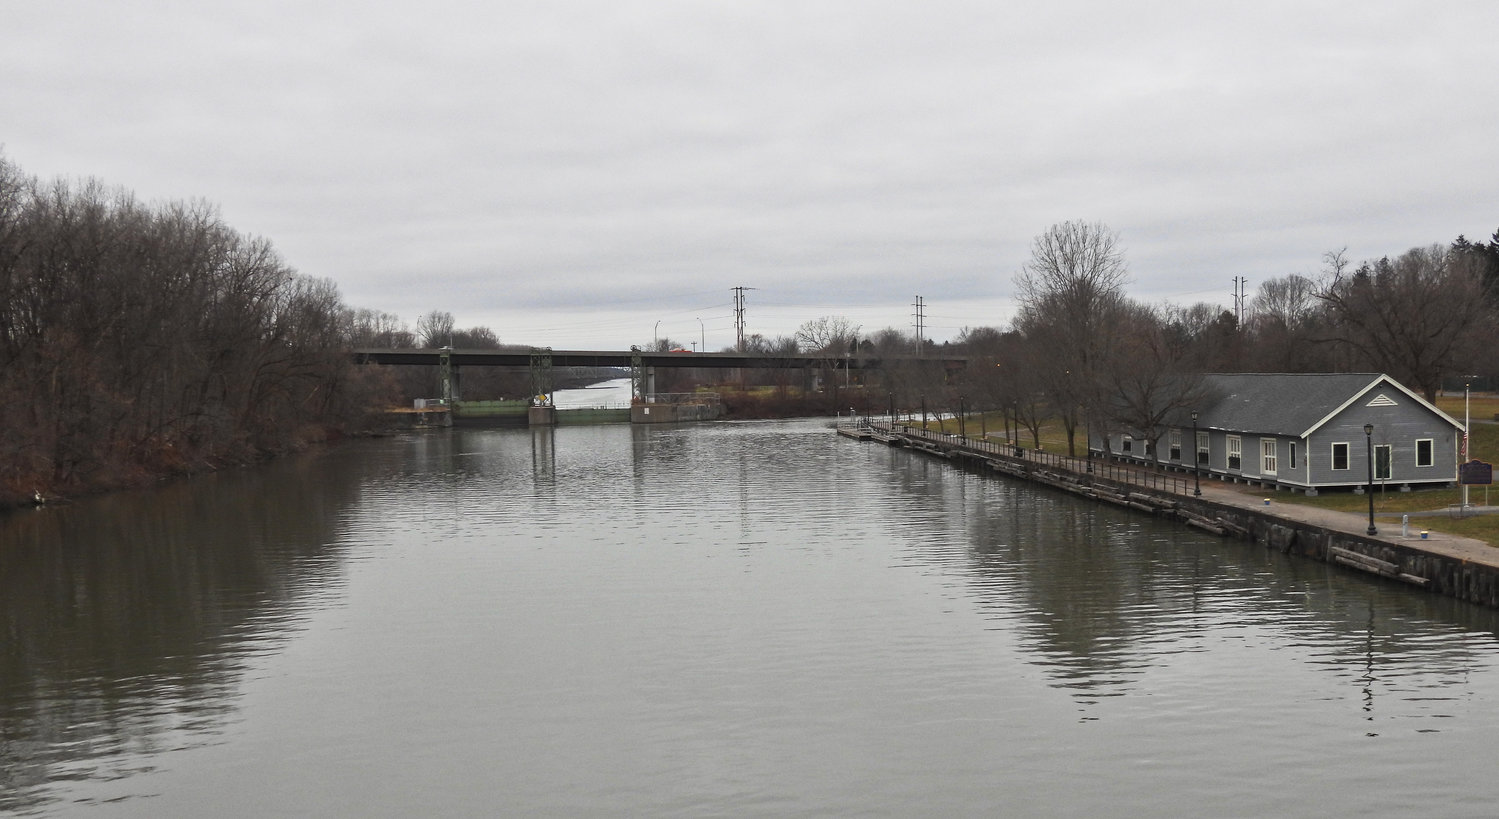 BARGE CANAL — Pictured is the Barge Canal at Bellamy Harbor Park. Mariners are advised that, conditions permitting, all portions of the New York State Canal system are scheduled to open Friday, May 20, 2022, at 7 a.m. for the 2022 navigation season.